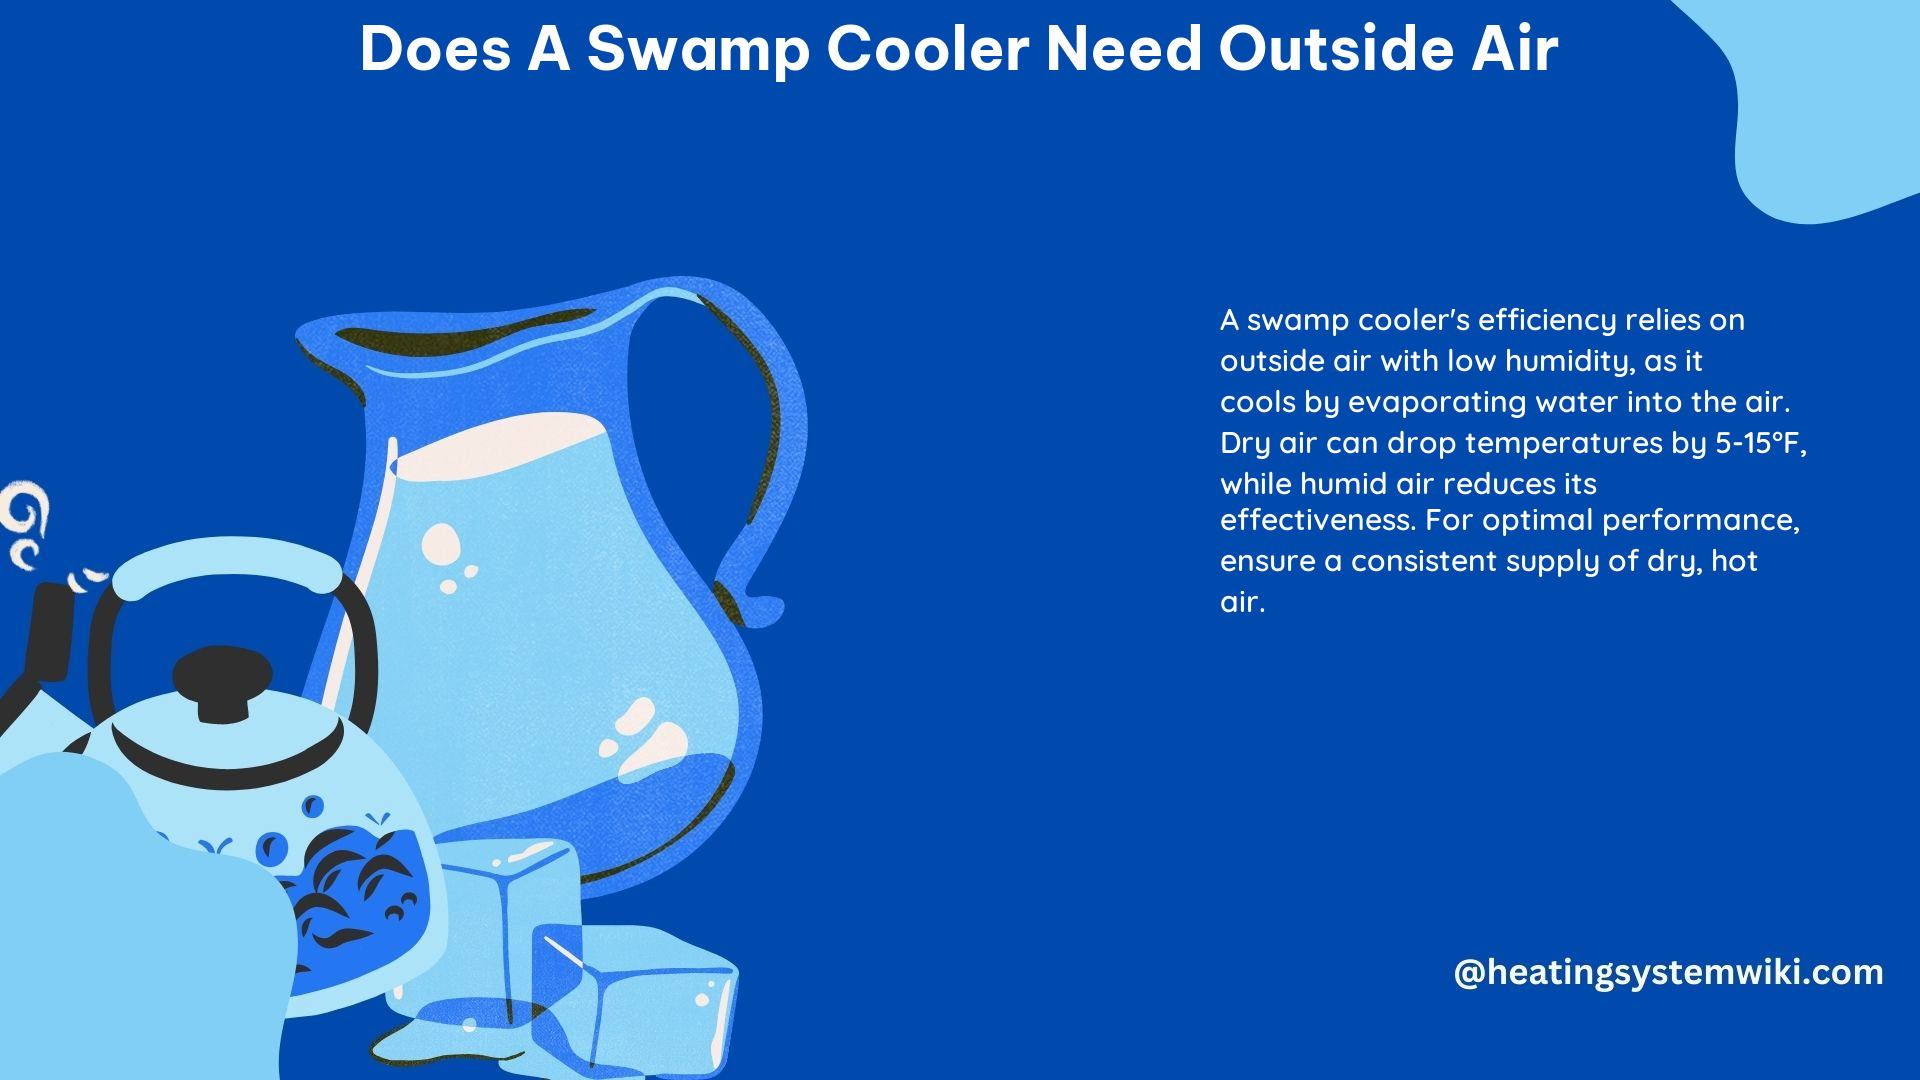 Does a Swamp Cooler Need Outside Air